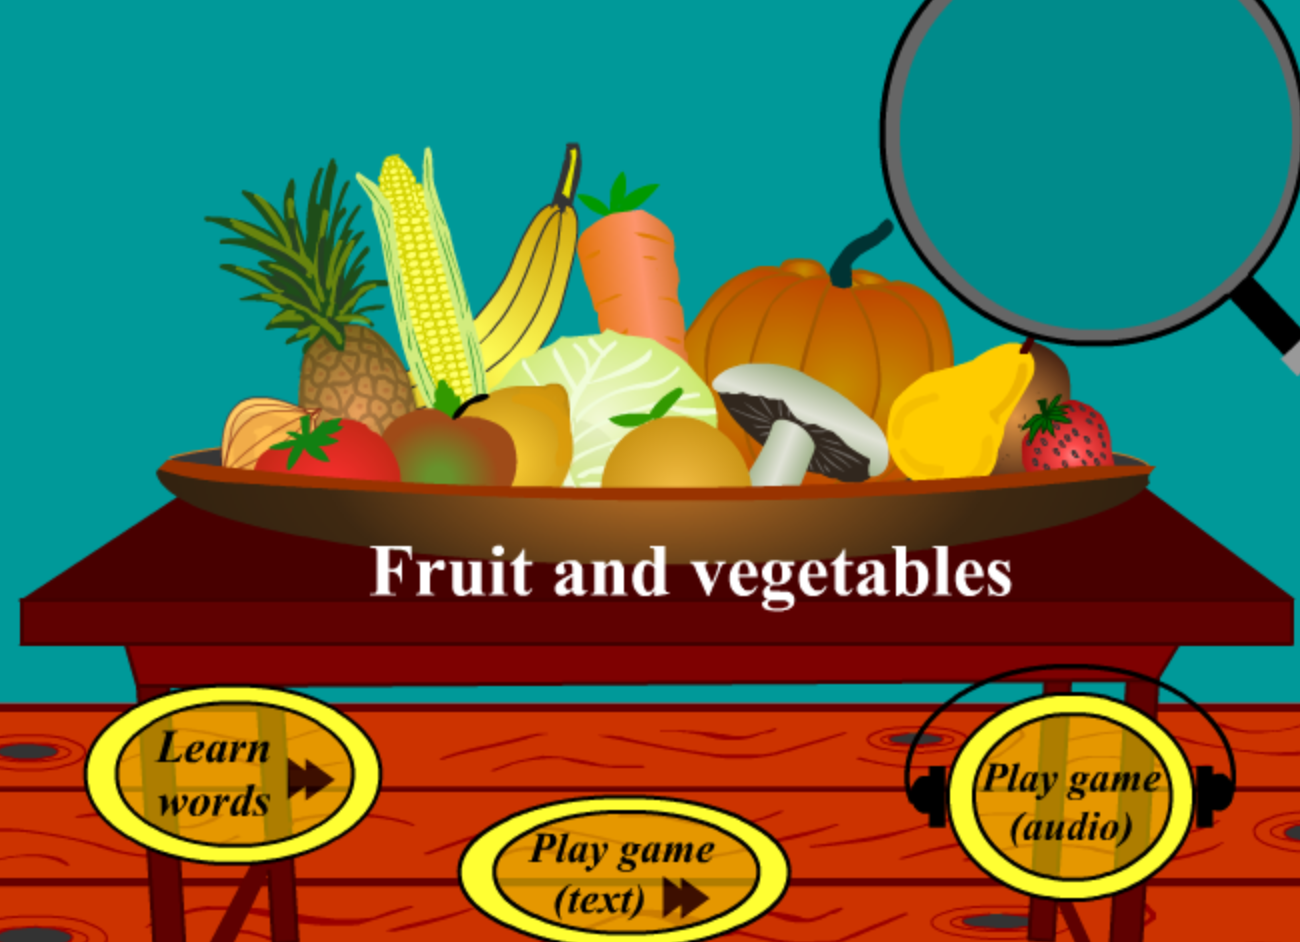 Digital Dialects Fruits and Vegetables Game